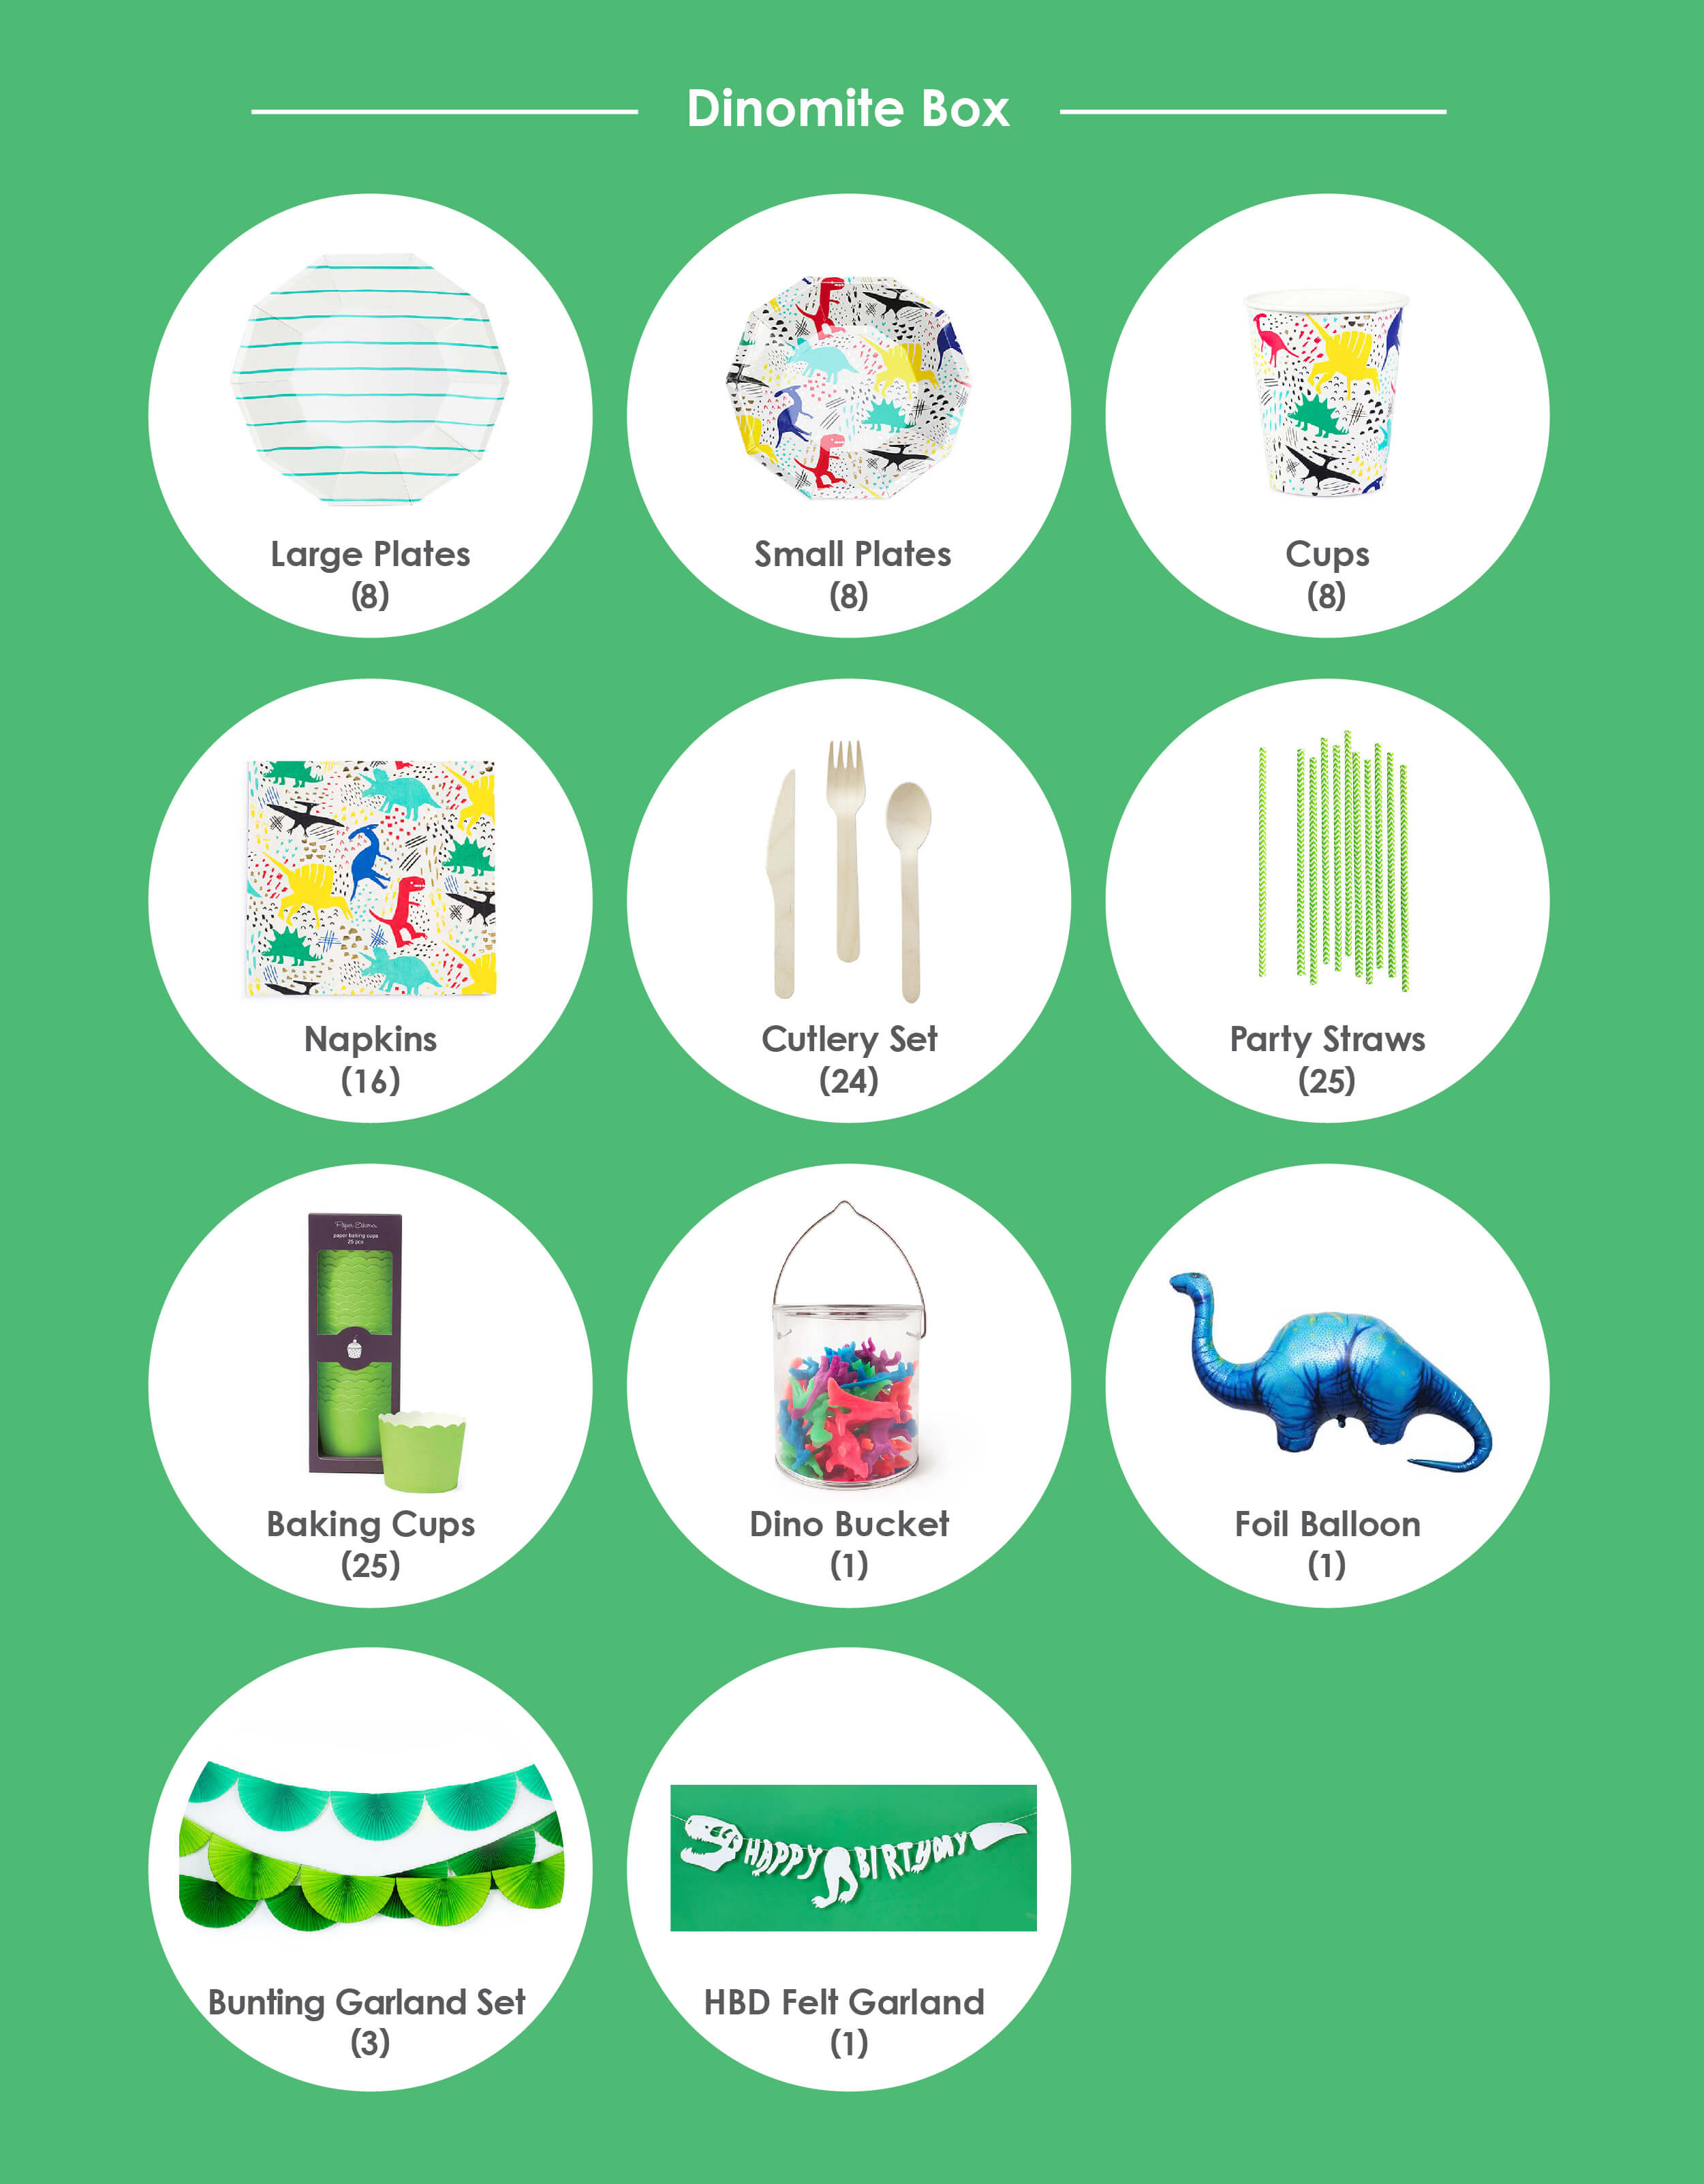 Product list of Morden and Neon Dinosaur theme birthday party